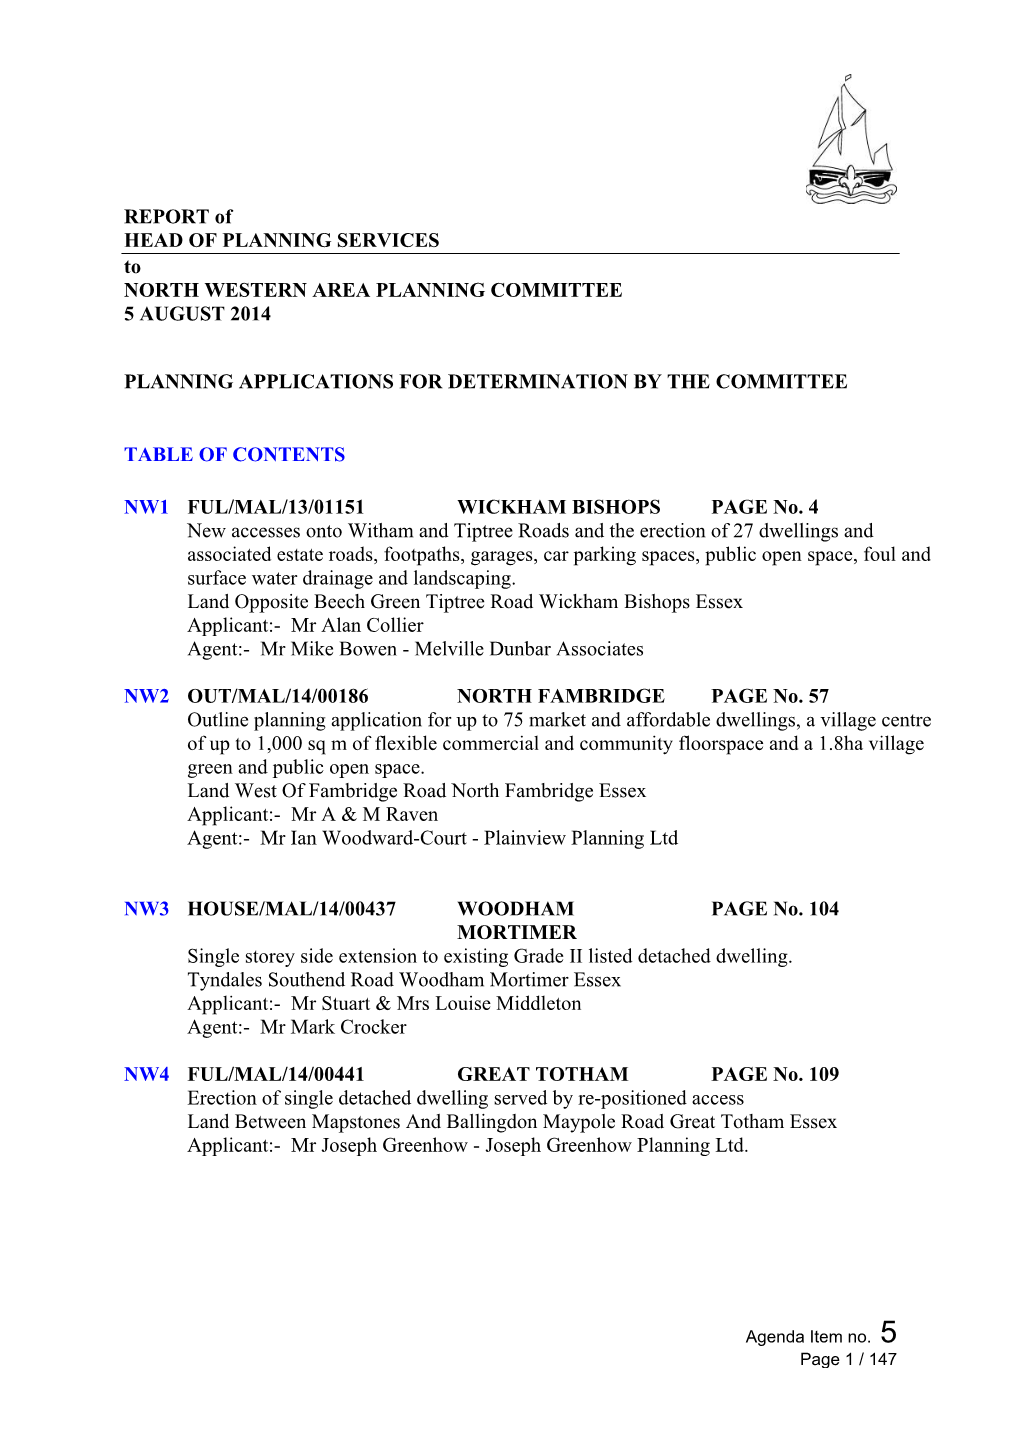 REPORT of HEAD of PLANNING SERVICES to NORTH WESTERN AREA PLANNING COMMITTEE 5 AUGUST 2014